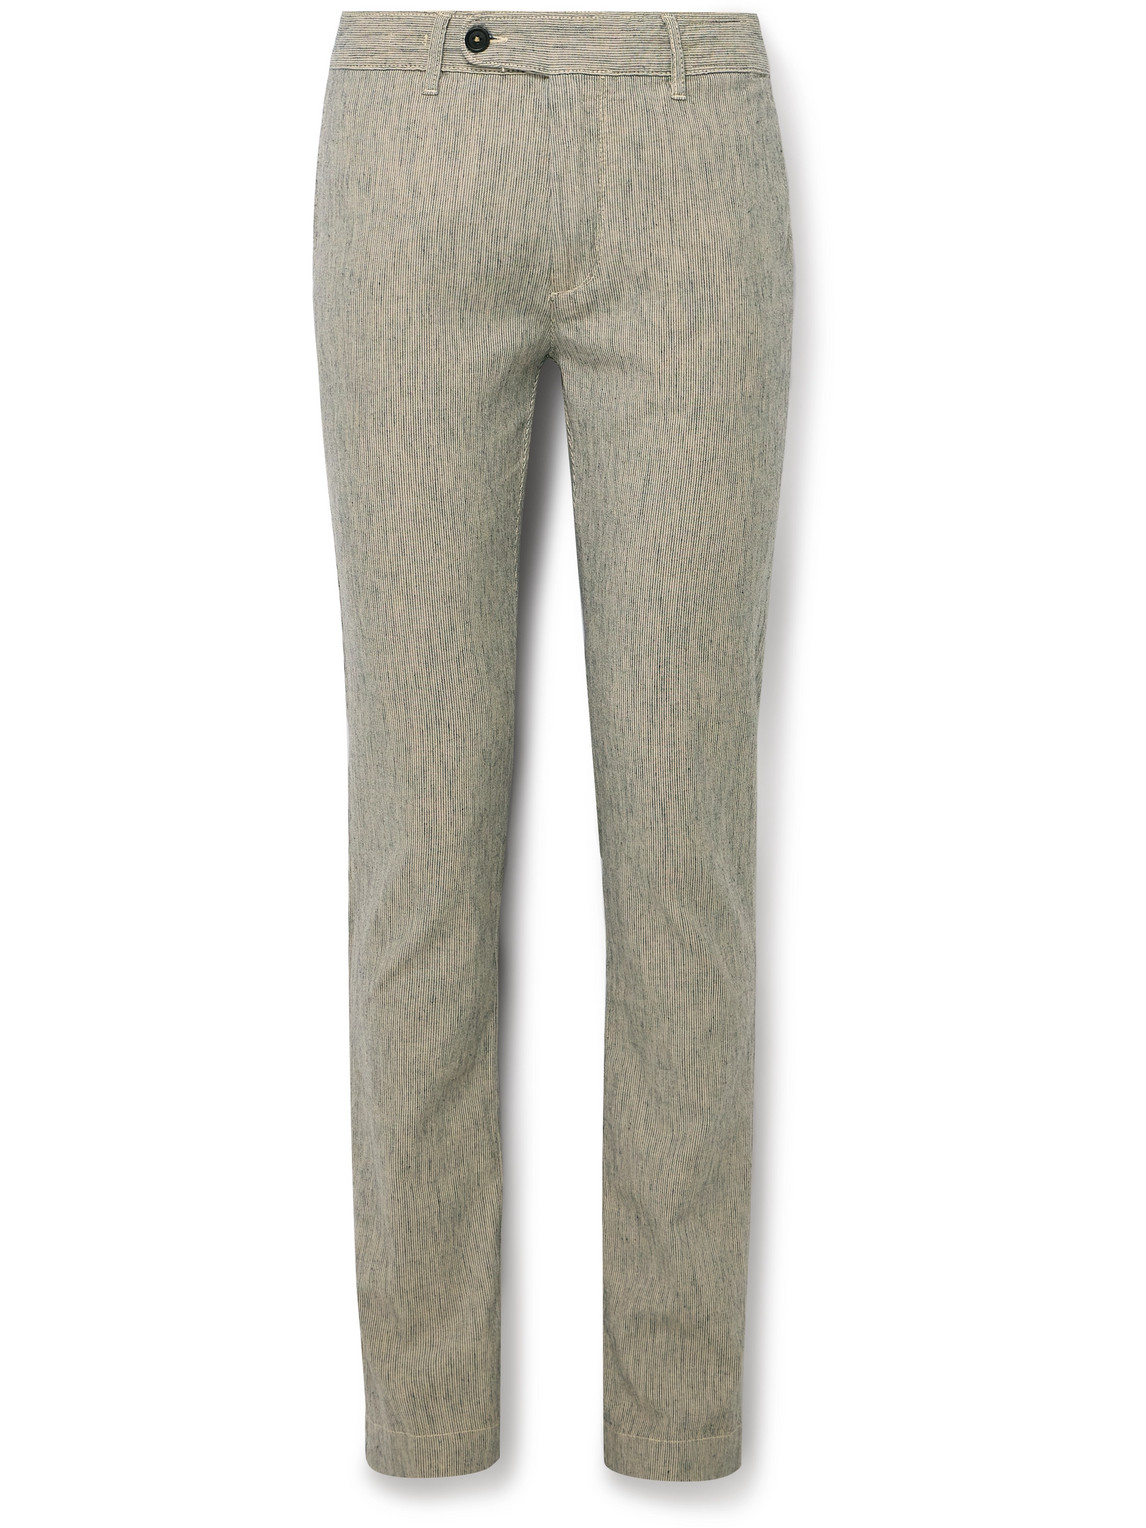 Winch2 Slim-Fit Striped Cotton-Blend Trousers